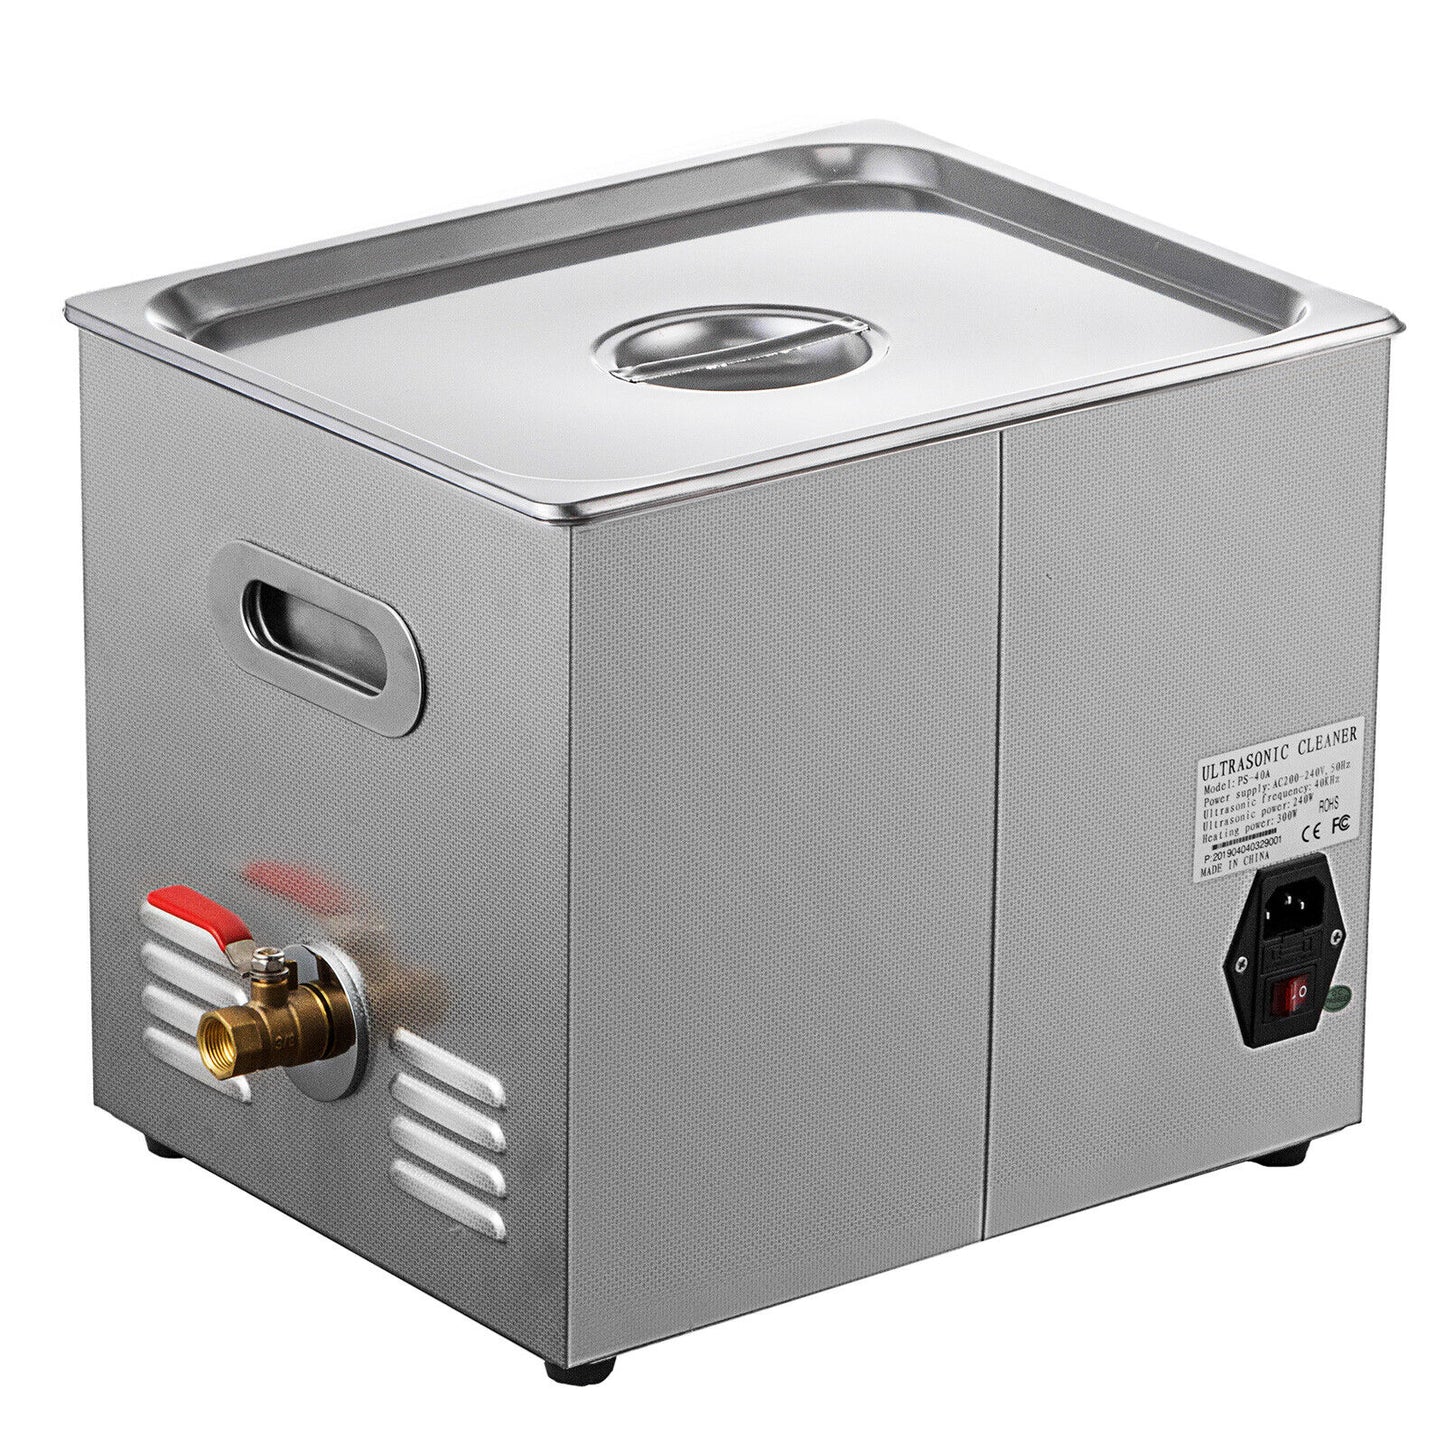 New 10L Ultrasonic Cleaner Stainless Steel Industry Heated Heater w/Timer